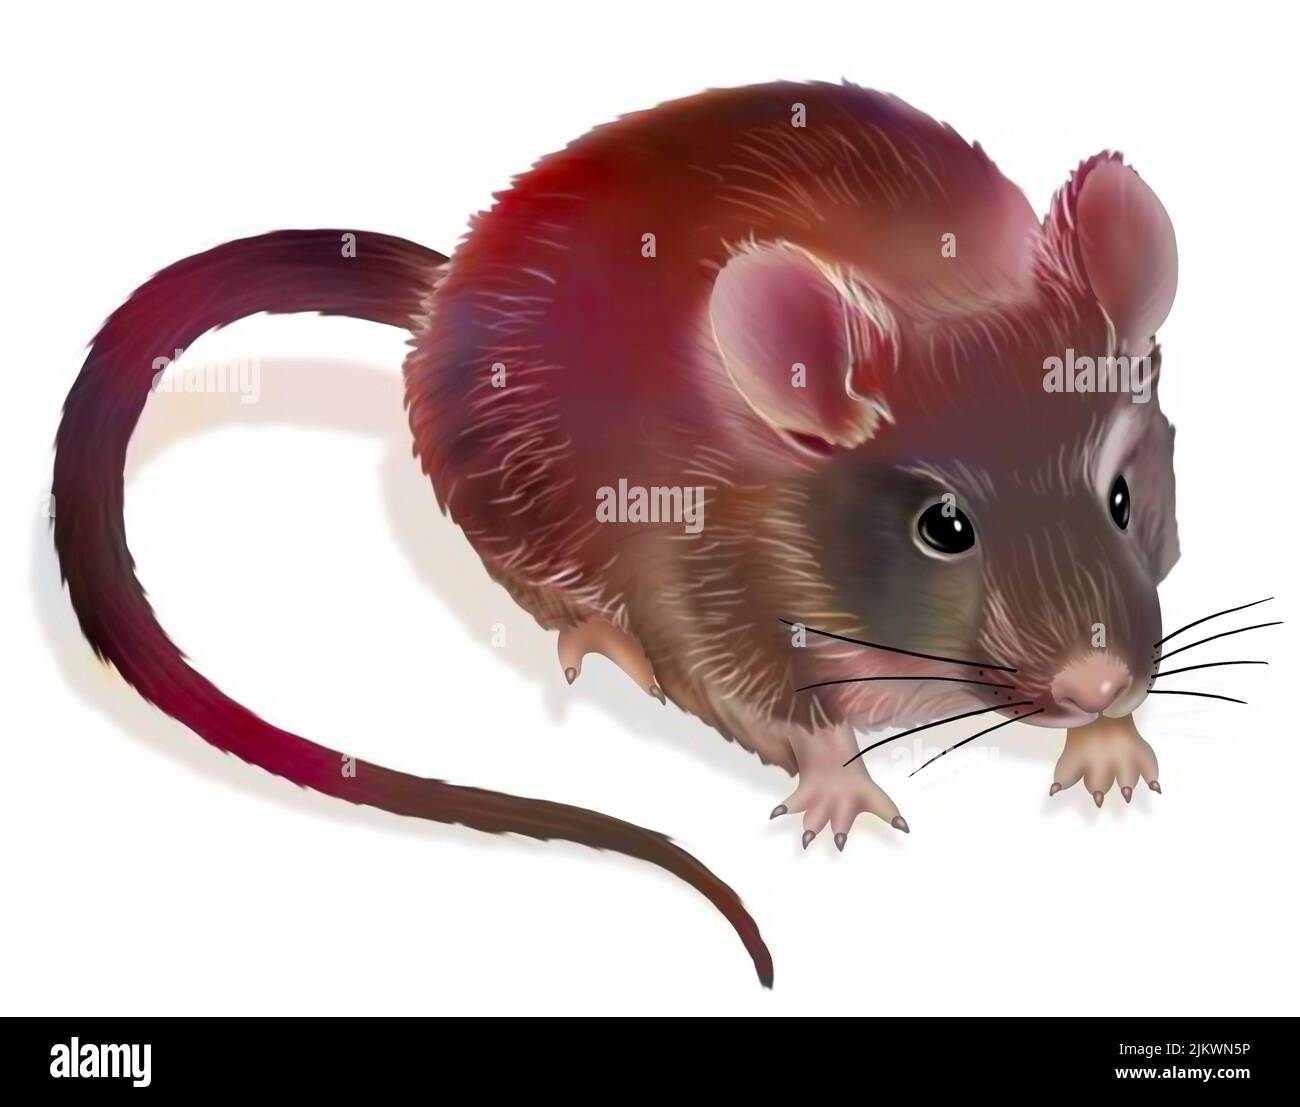 Representation of a laboratory mouse on a white background. Stock Photo